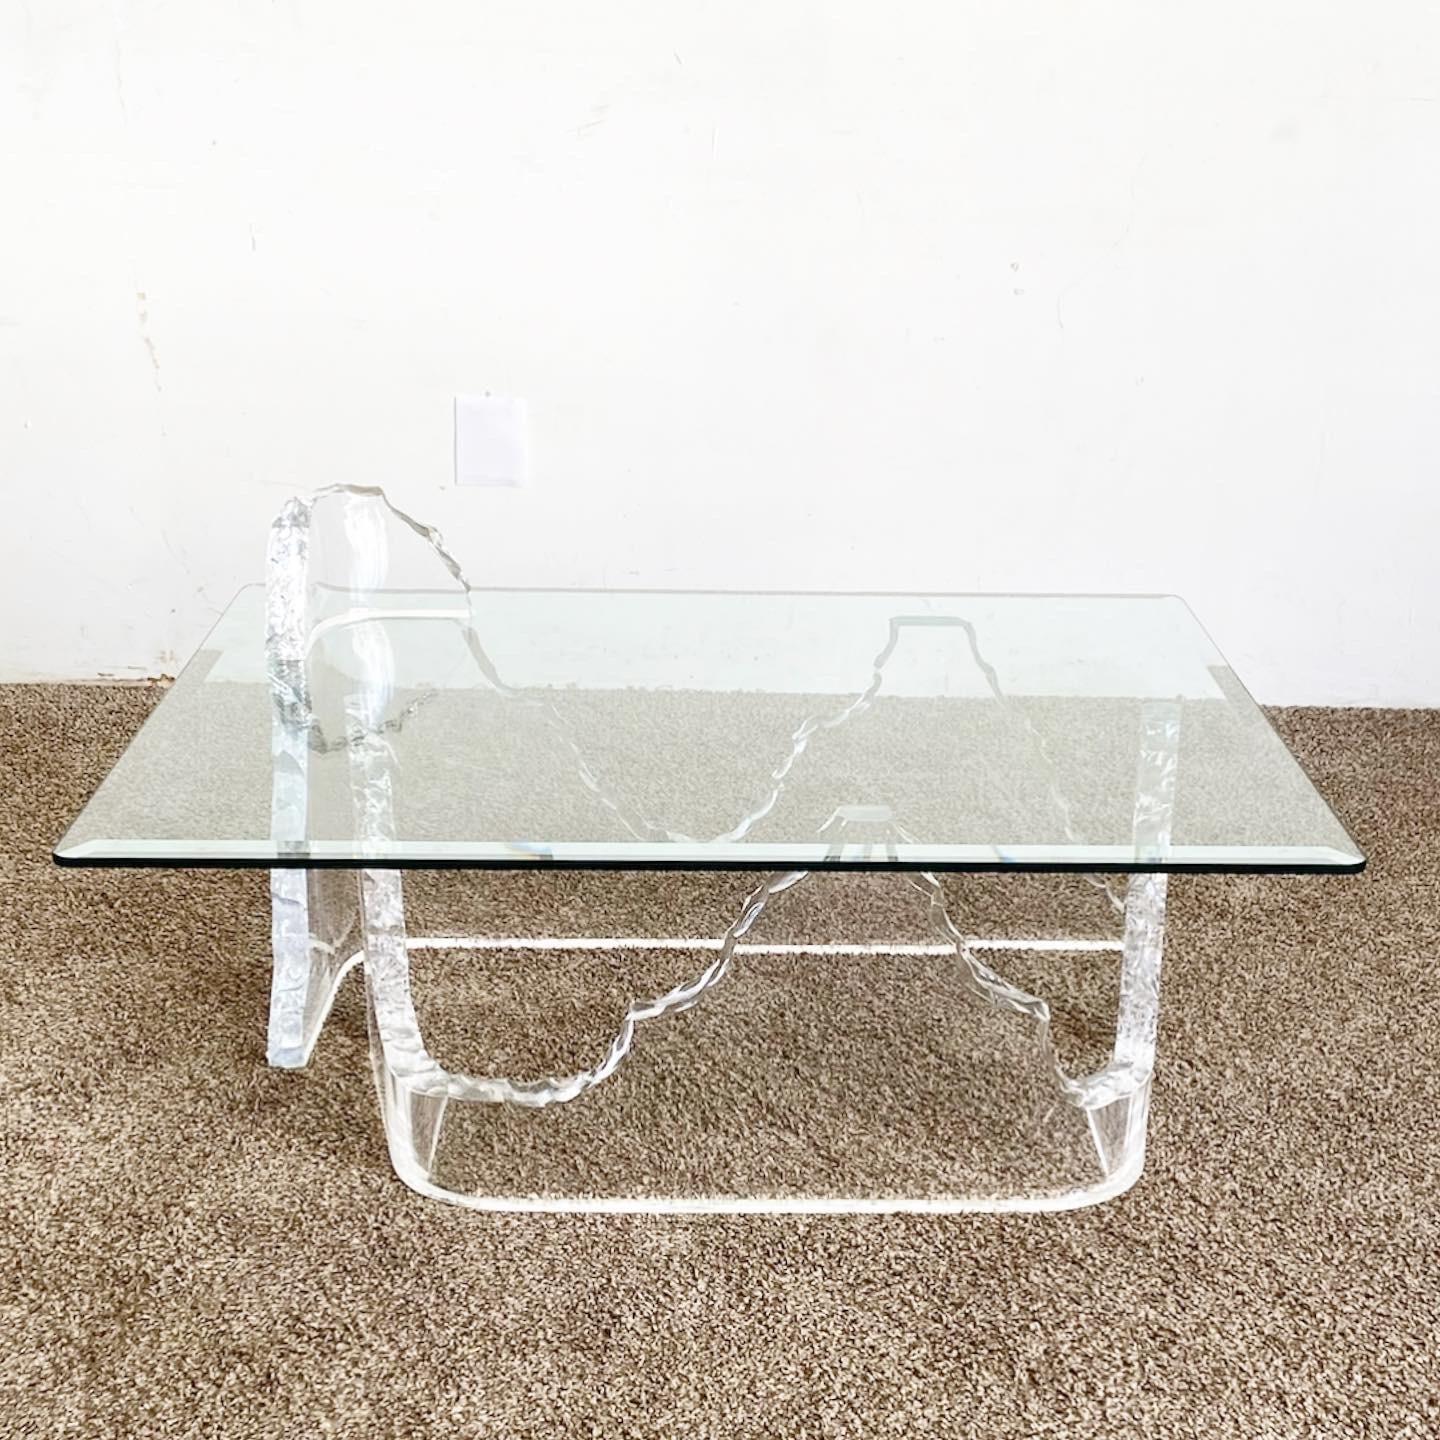 Experience unique design with our Postmodern Sculpted Lucite Glass Top Coffee Table, offering a blend of sophistication and innovative style.
Experience unique design with our Postmodern Sculpted Lucite Glass Top Coffee Table, offering a blend of